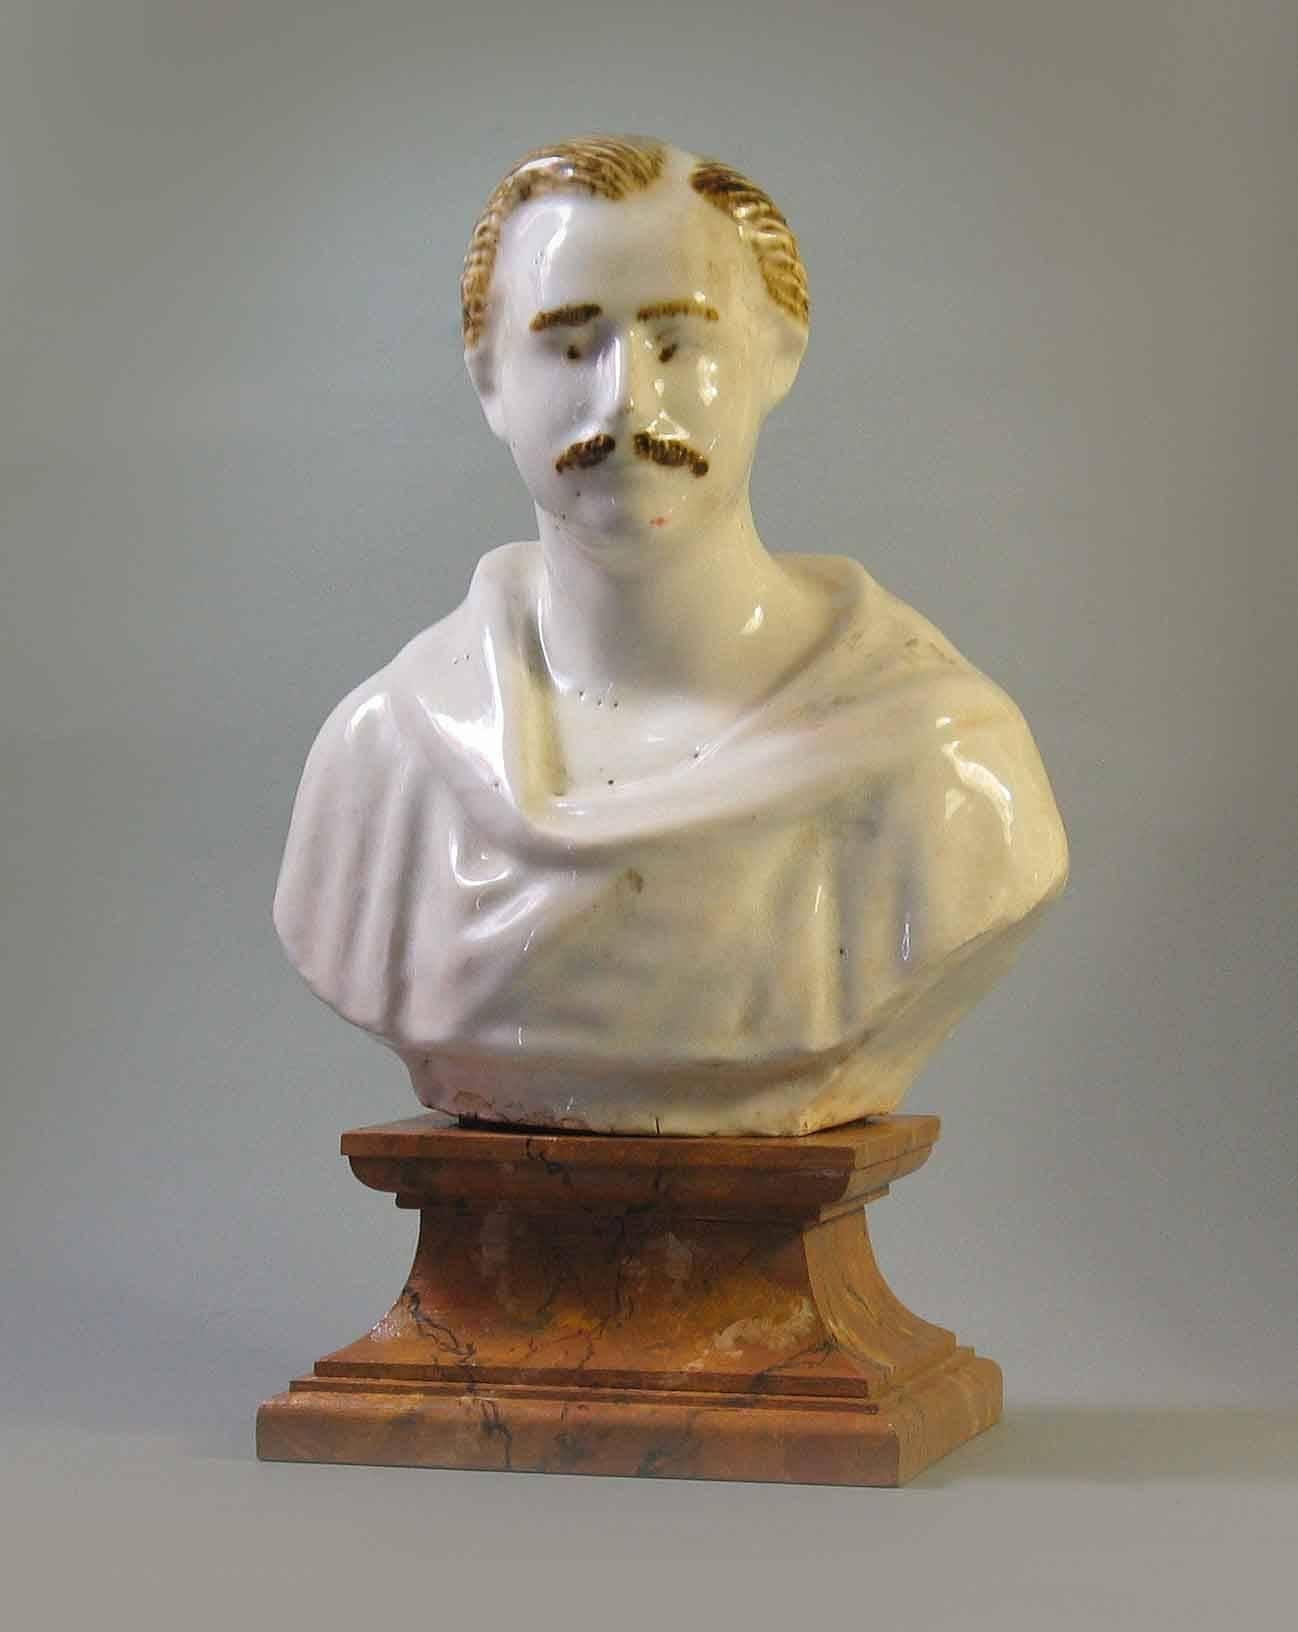 Porcelain Staffordshire Pearlware Bust of Prince Albert, circa 1850